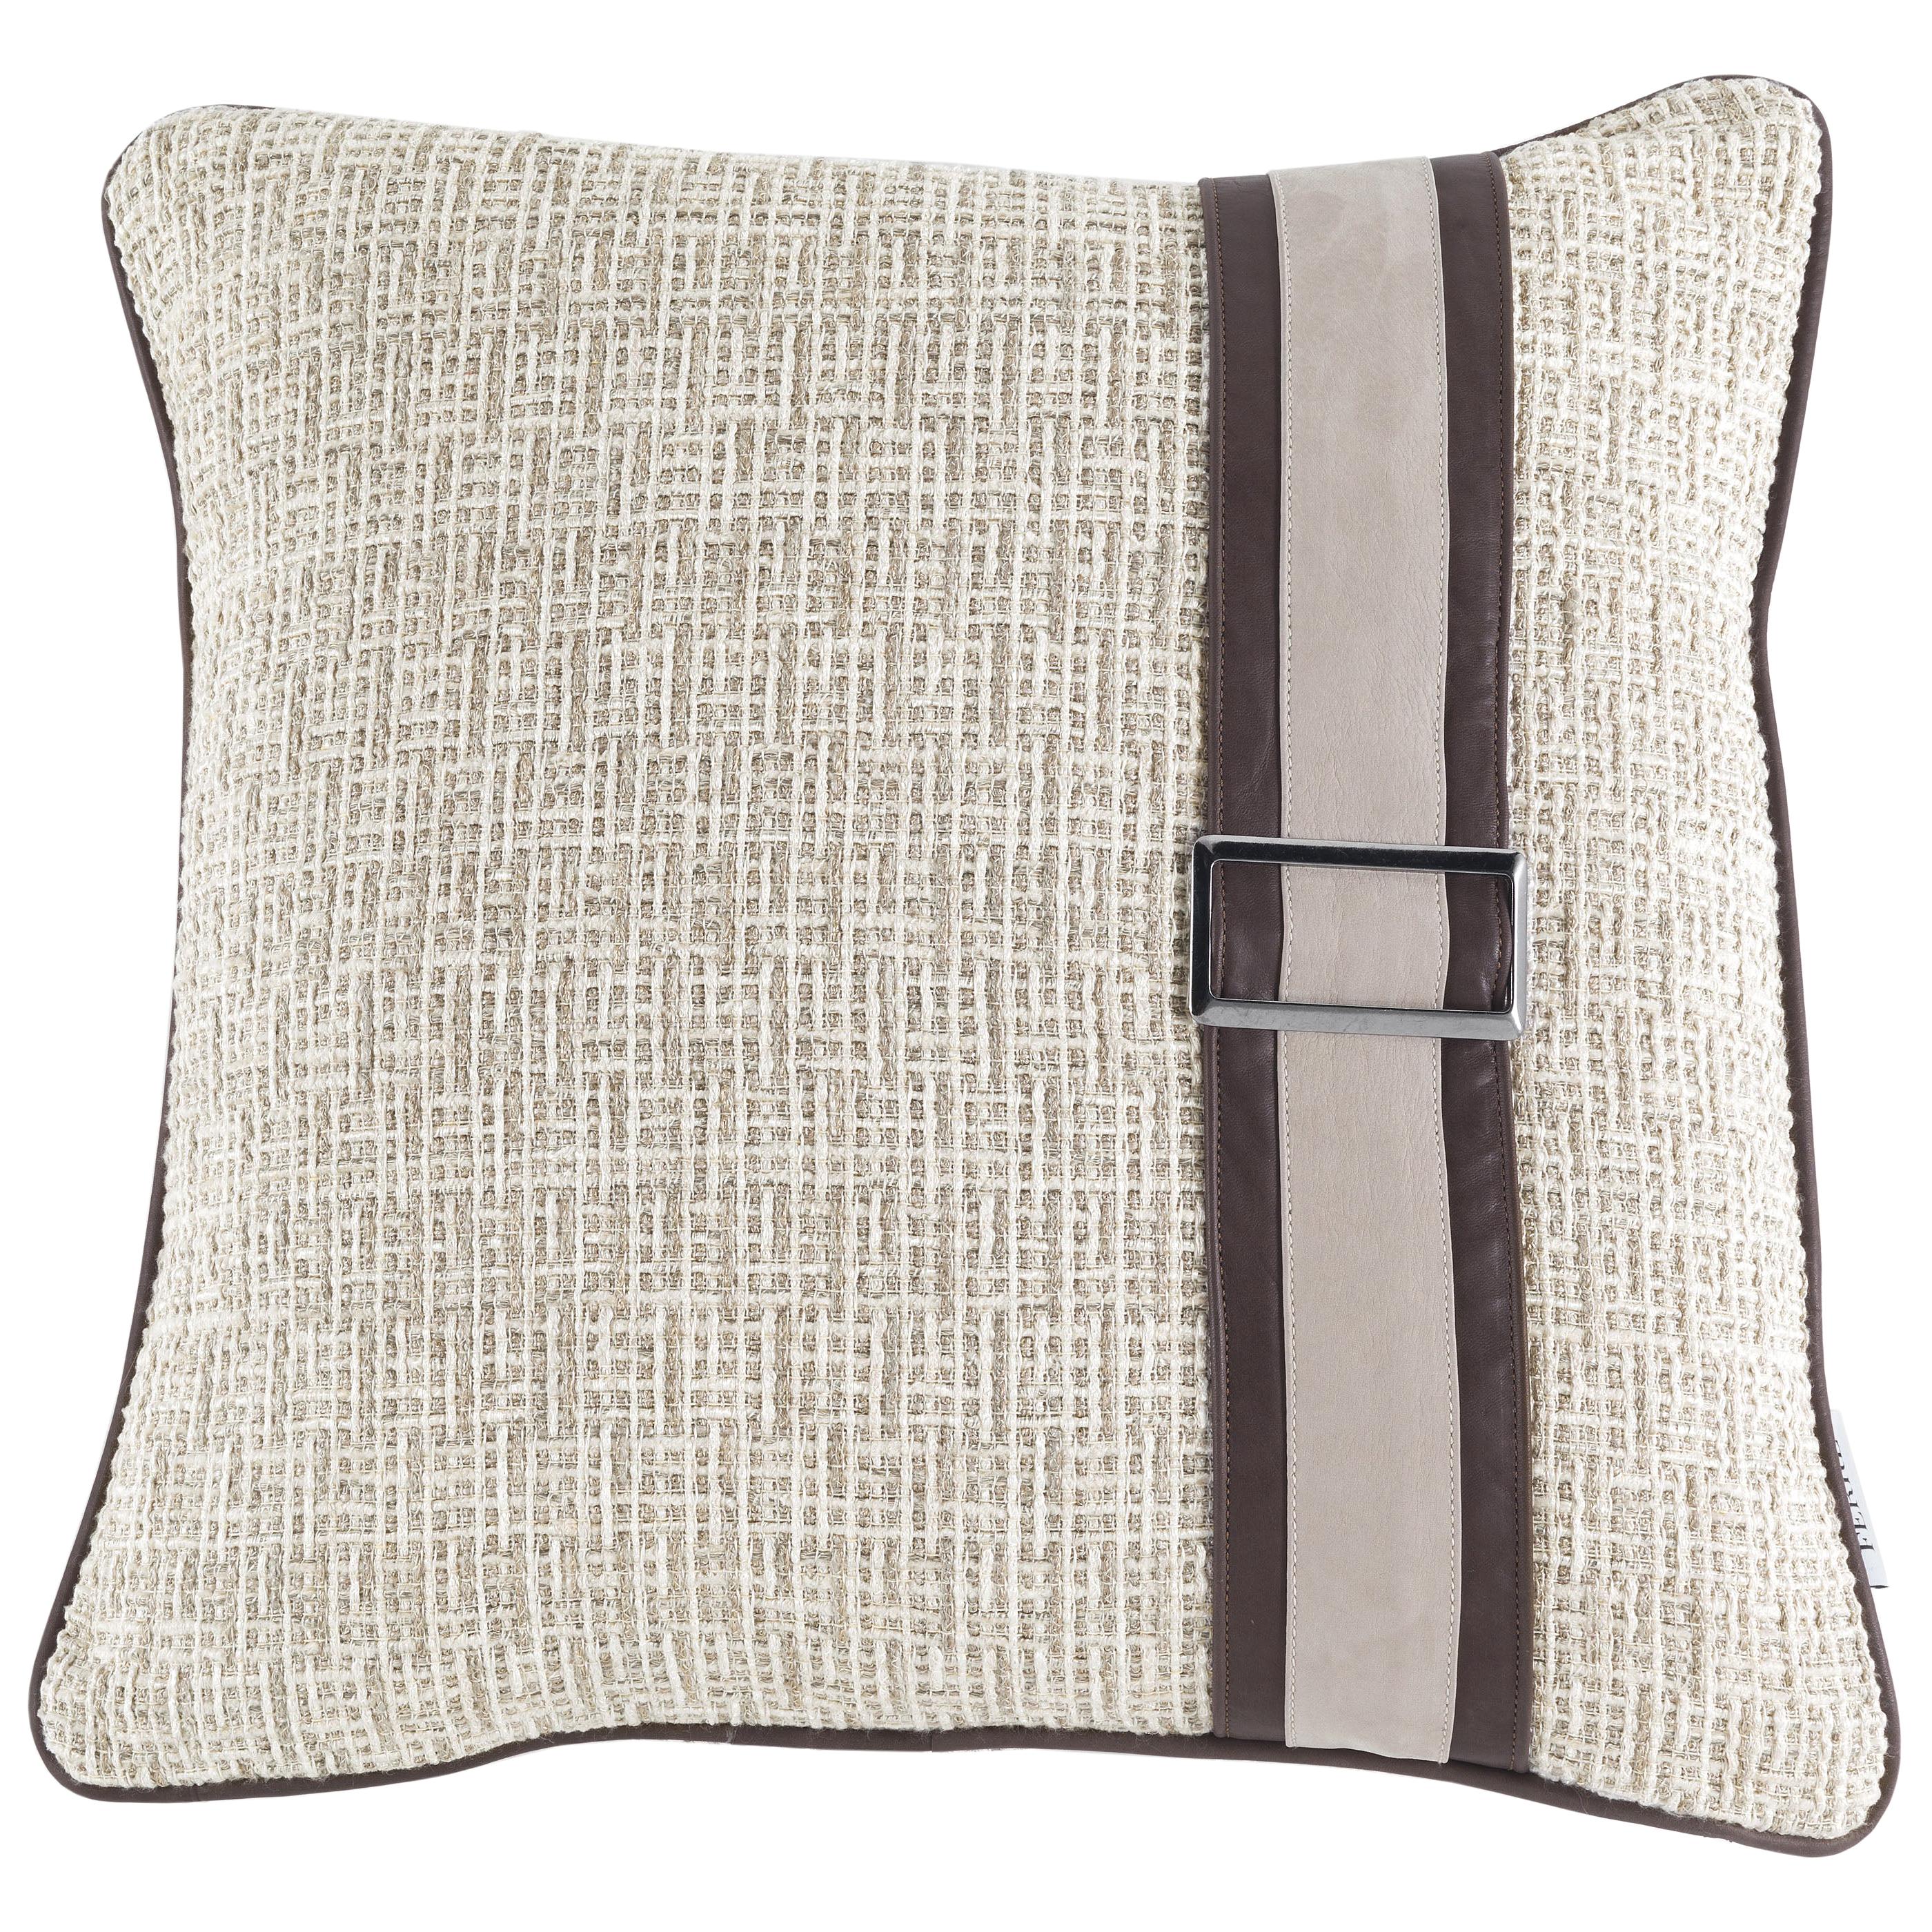 21st Century Wahi Cushion in Fabric and Leather by Gianfranco Ferré Home 